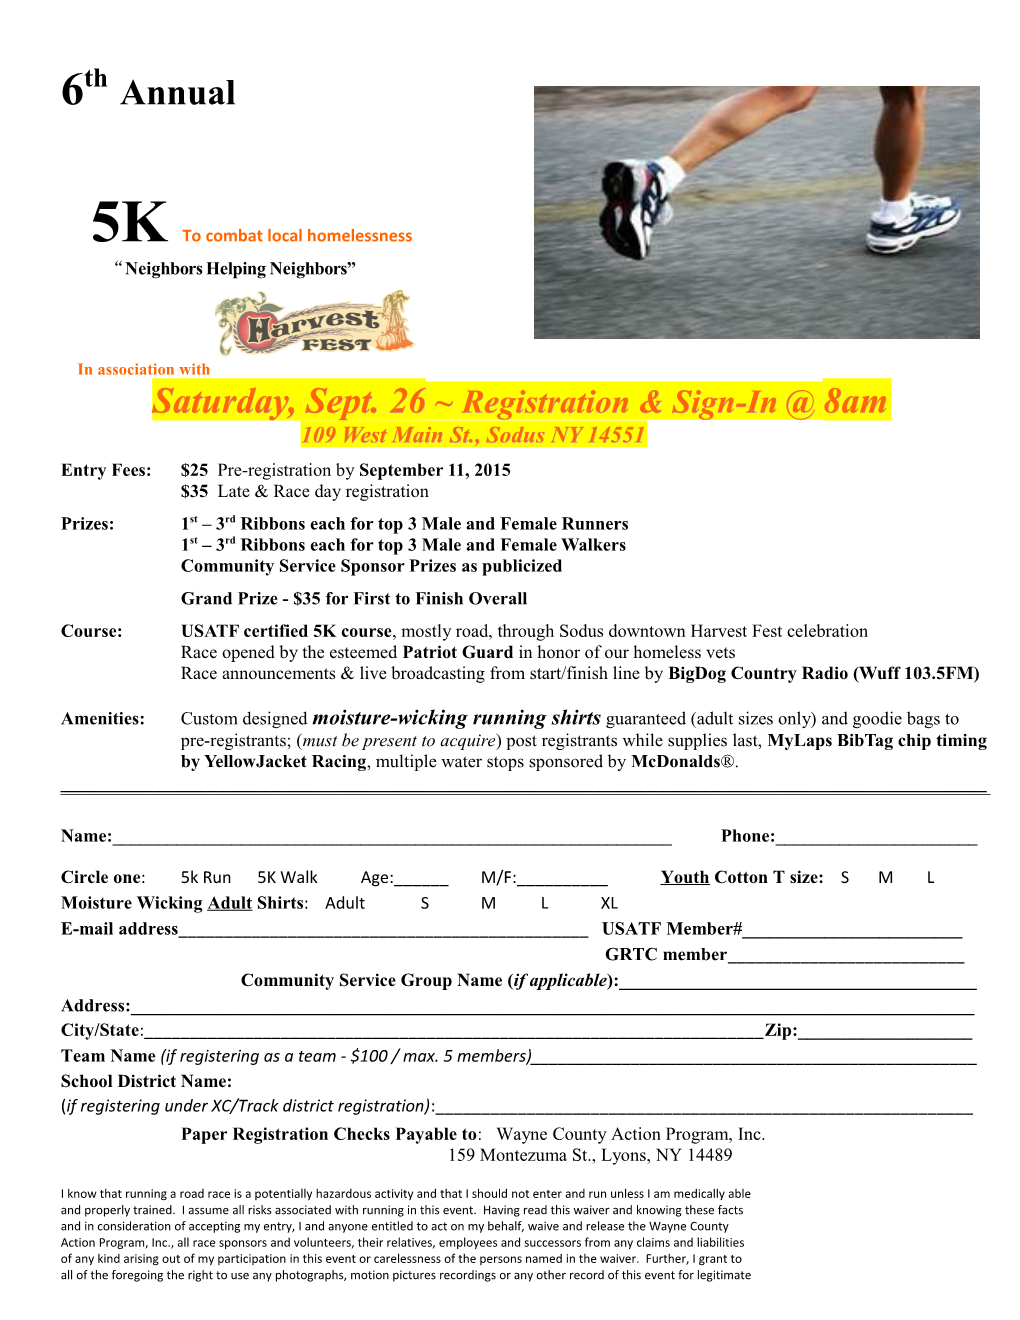 5K to Combat Local Homelessness